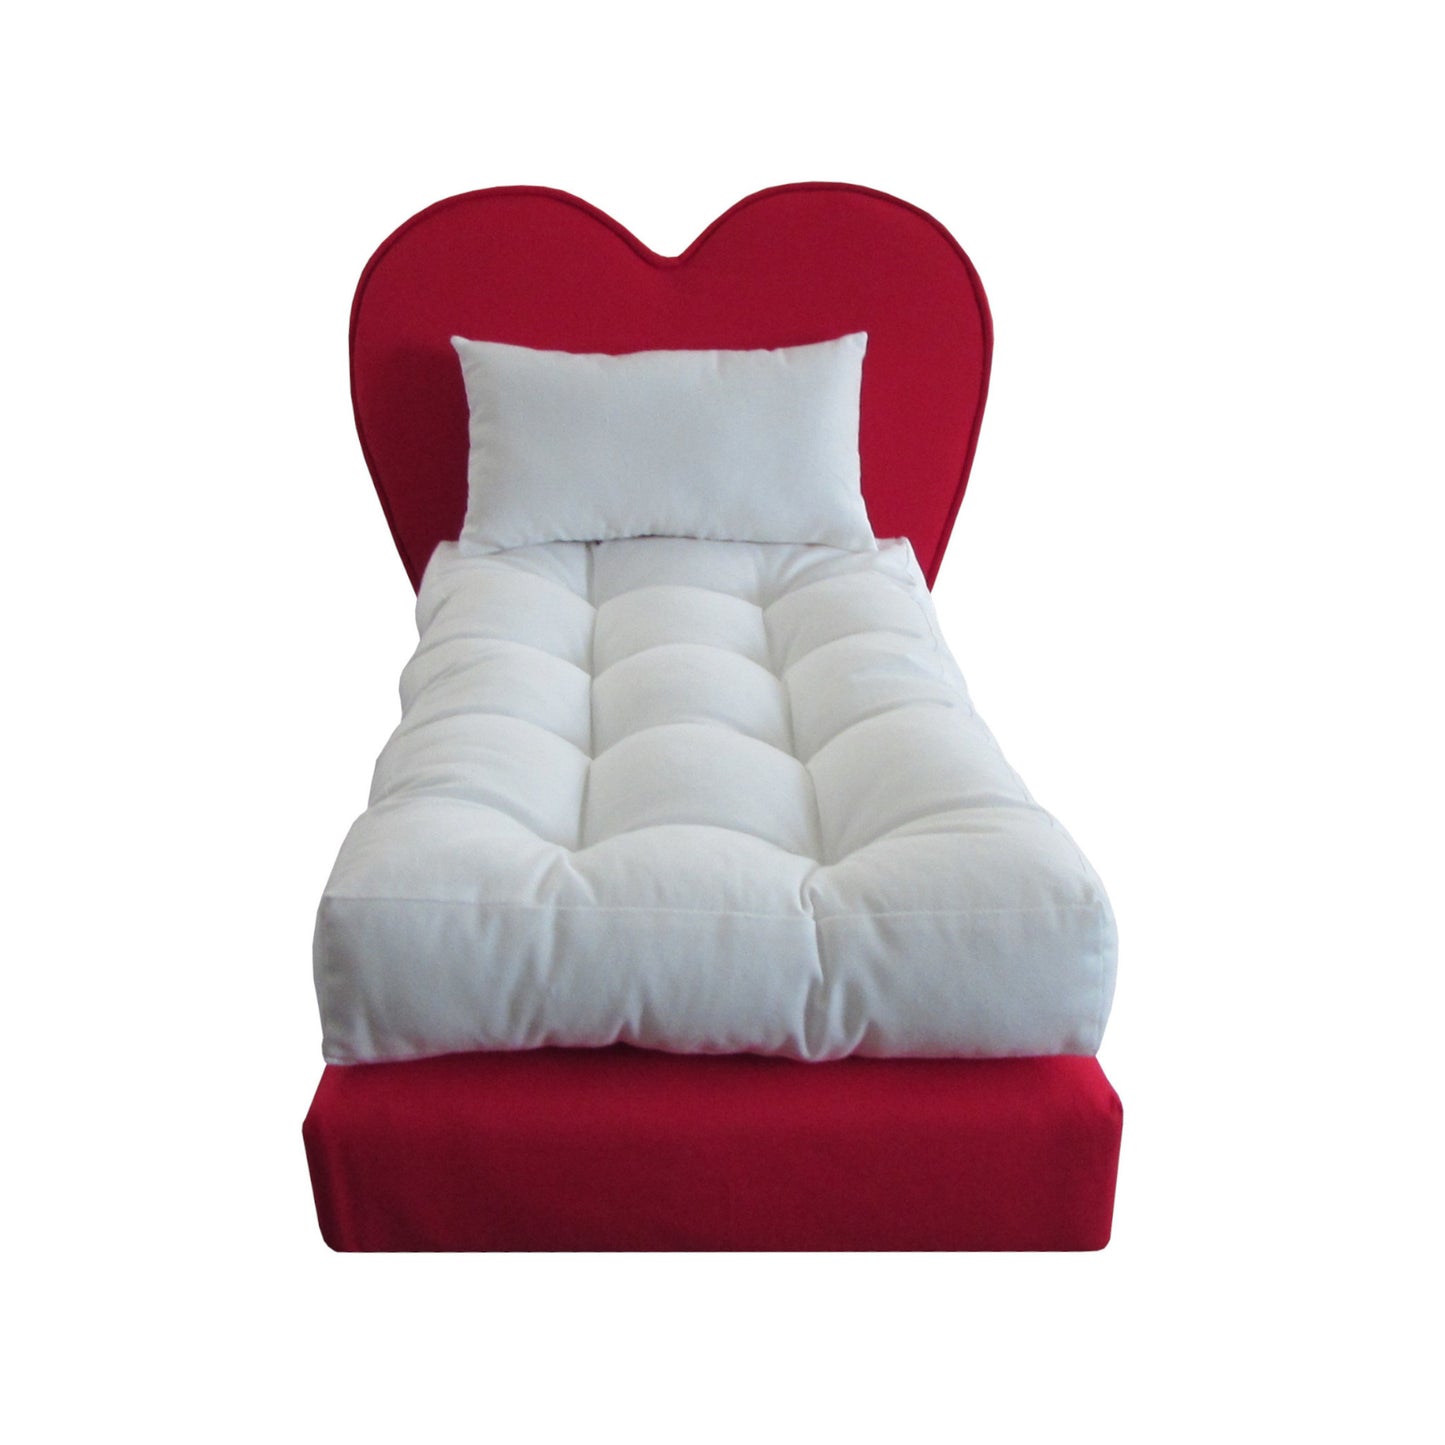 Upholstered Red Heart Doll Bed for 18-inch dolls Second view